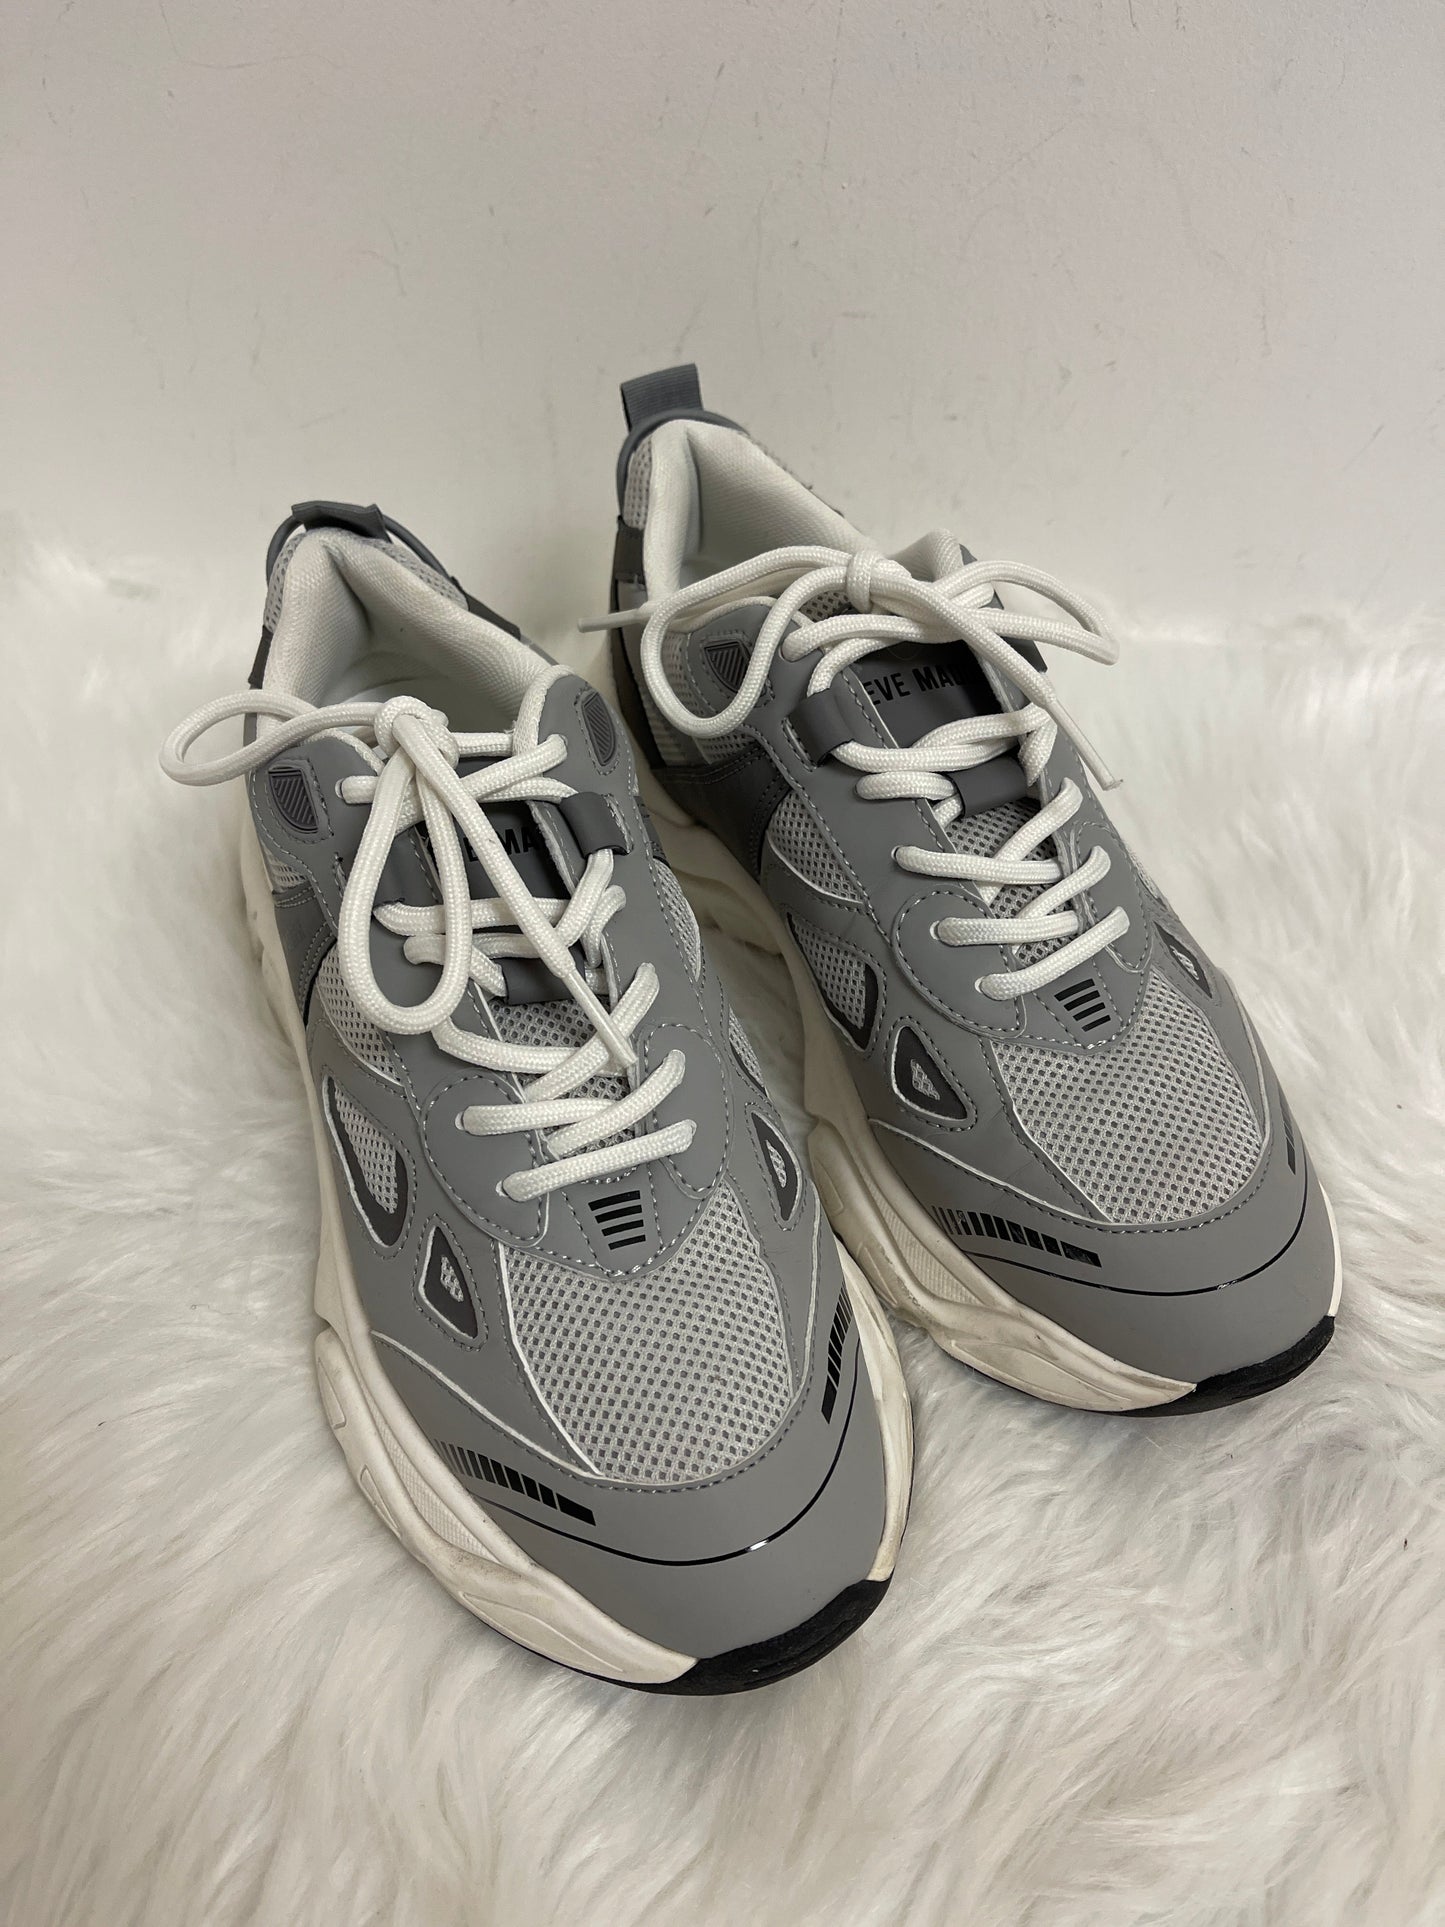 Grey Shoes Sneakers Steve Madden, Size 8.5